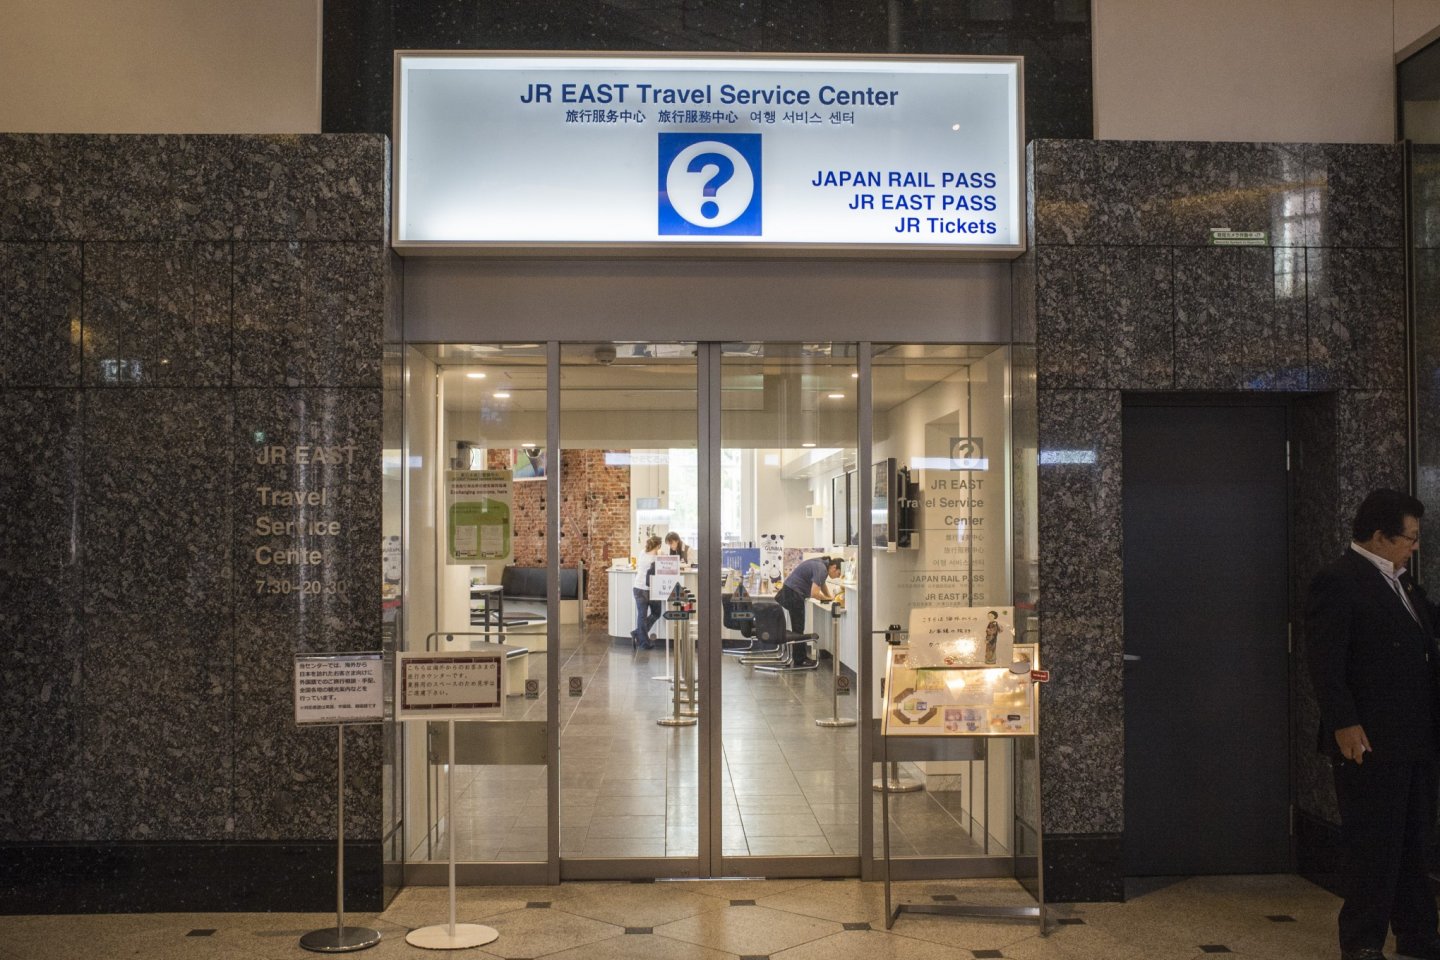 The entrance to the main JR East Travel Service Center